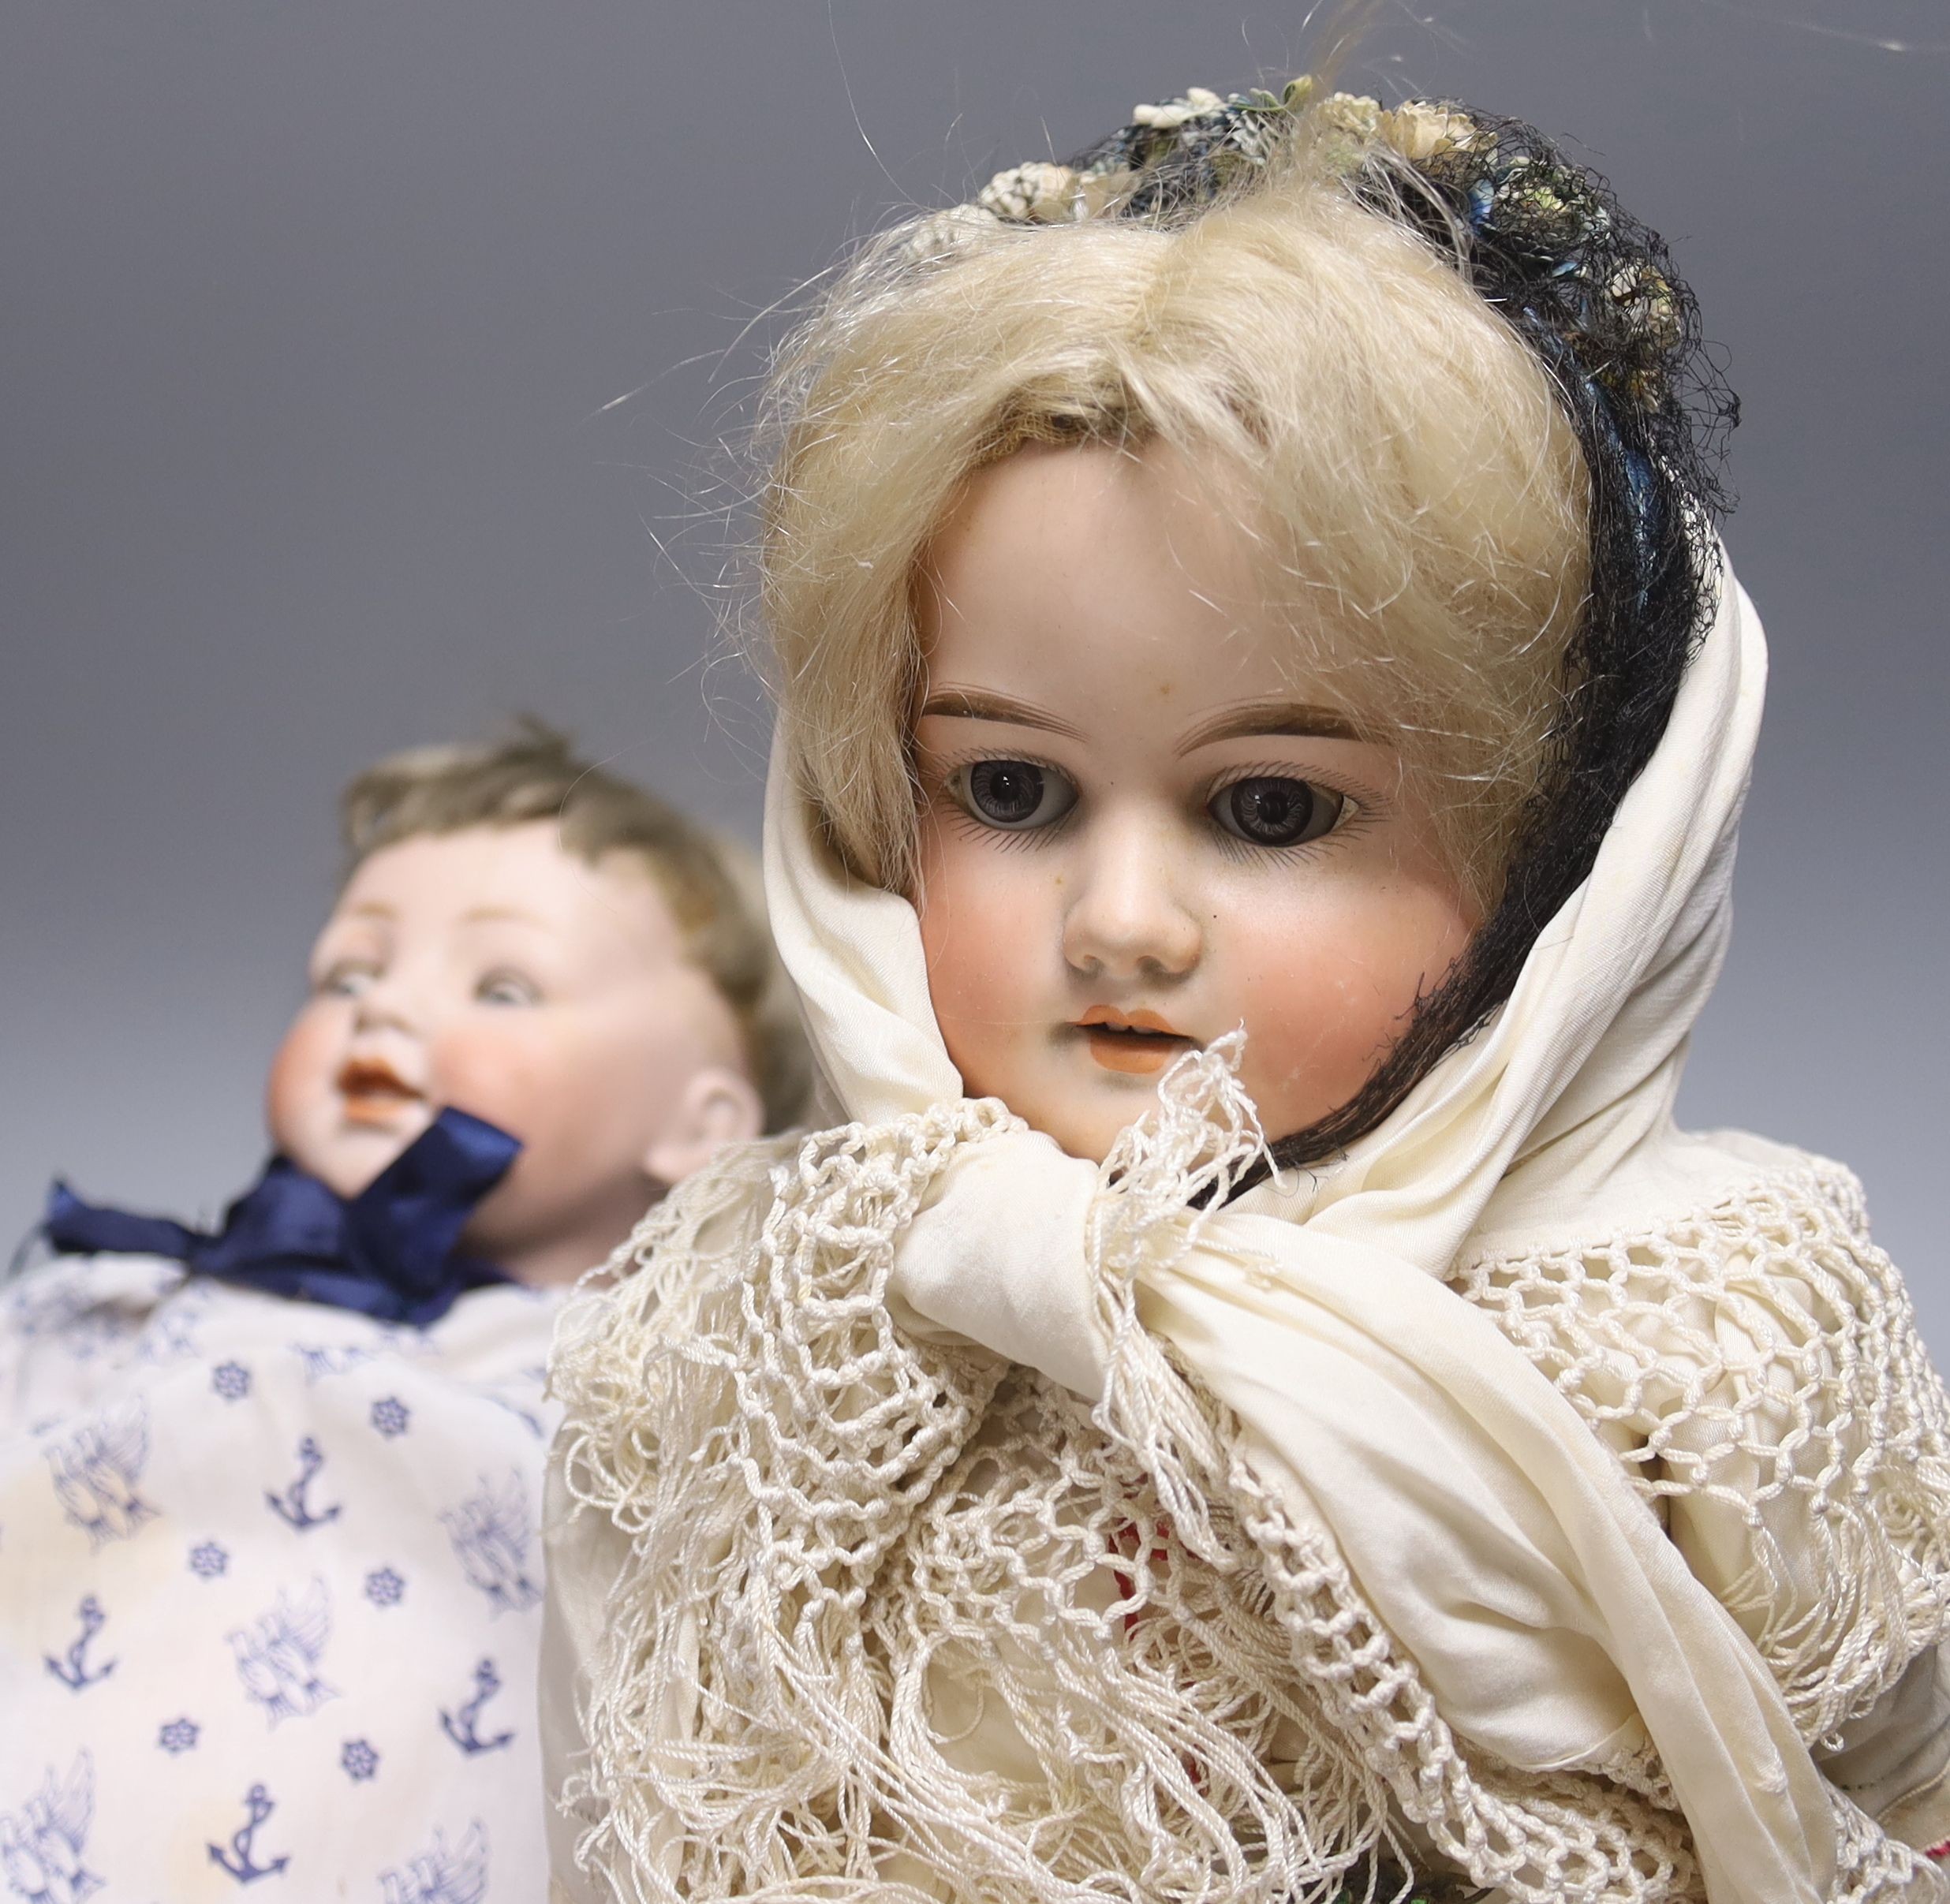 Two German bisque head dolls - AM 370 2 1/2, 57.5cm and JDK 211, - Image 2 of 4